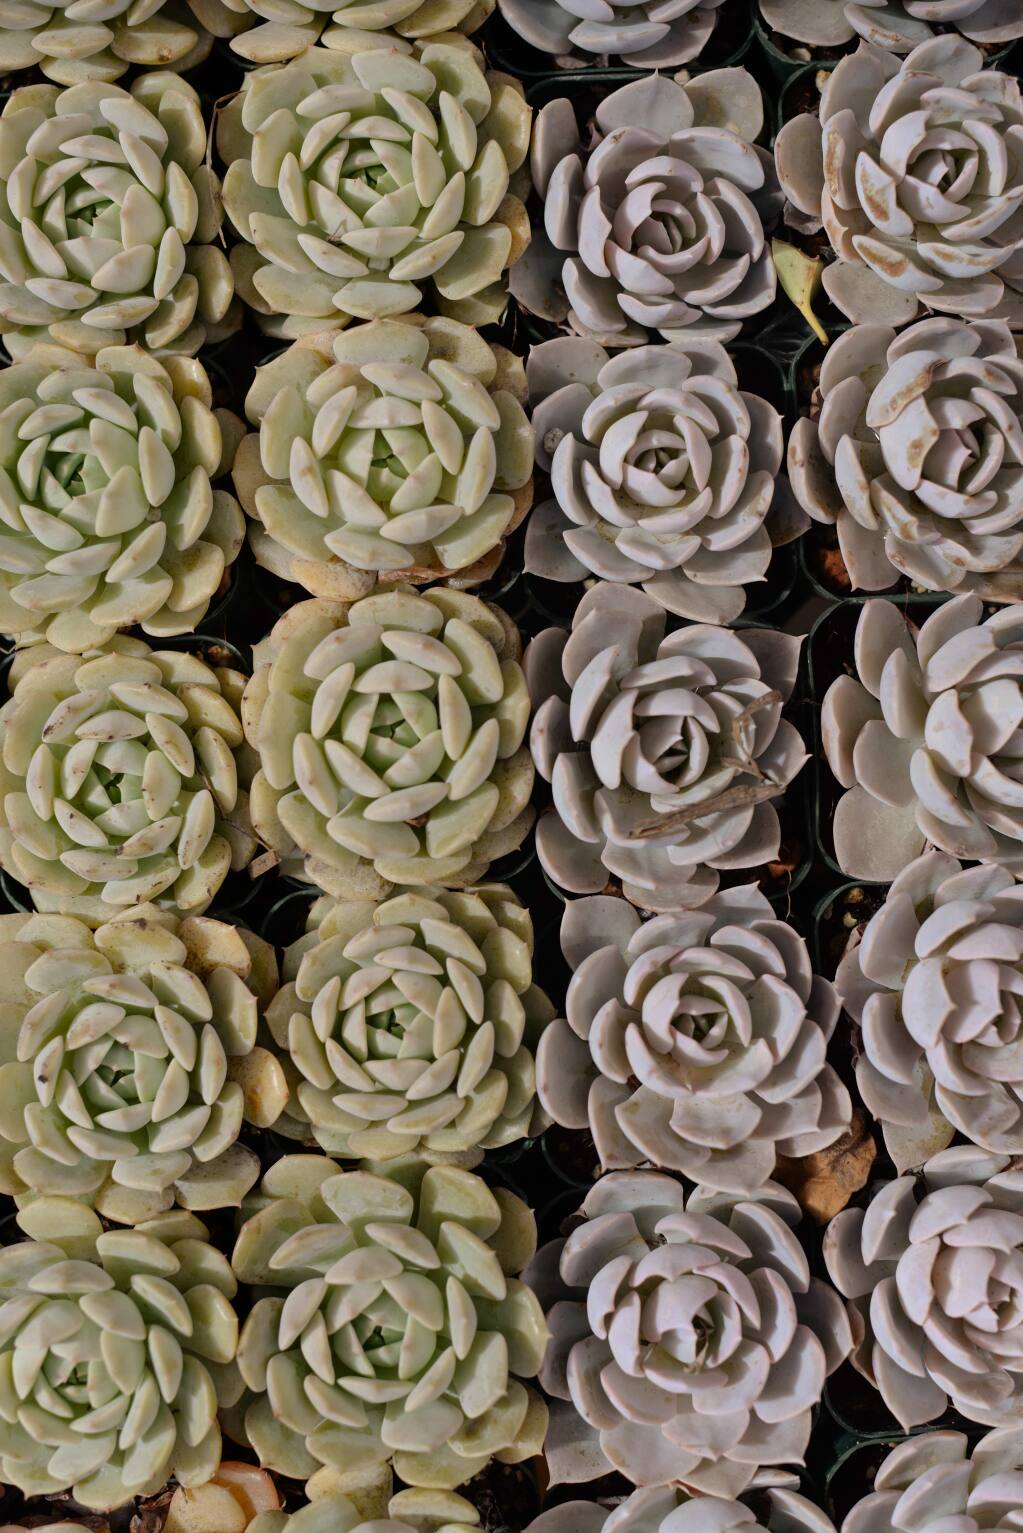 Echeveria succulent plants in the greenhouse at the Sunset Test Gardens at Cornerstone Sonoma on Arnold Drive in Sonoma. May 2, 2016. (Photo: Erik Castro/for The Press Democrat)